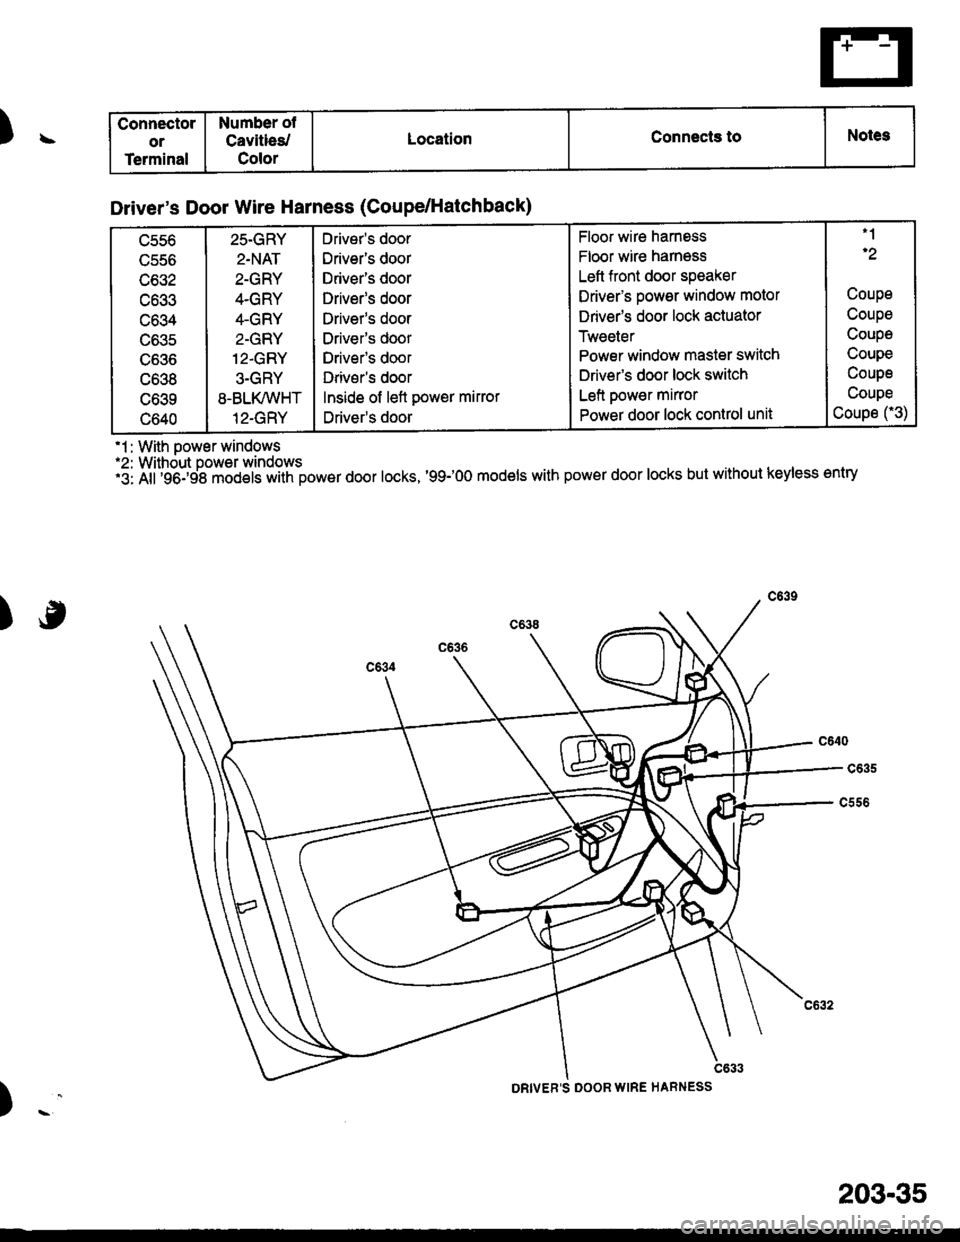 HONDA CIVIC 1996 6.G Workshop Manual )\
.1 : With oower windows*2: Without power windows.5 nii;gO: Sle models with power door locks, 99-OO models with power door locks but without keyless entry
)
Connector
or
Terminal
Number ot
Cavit